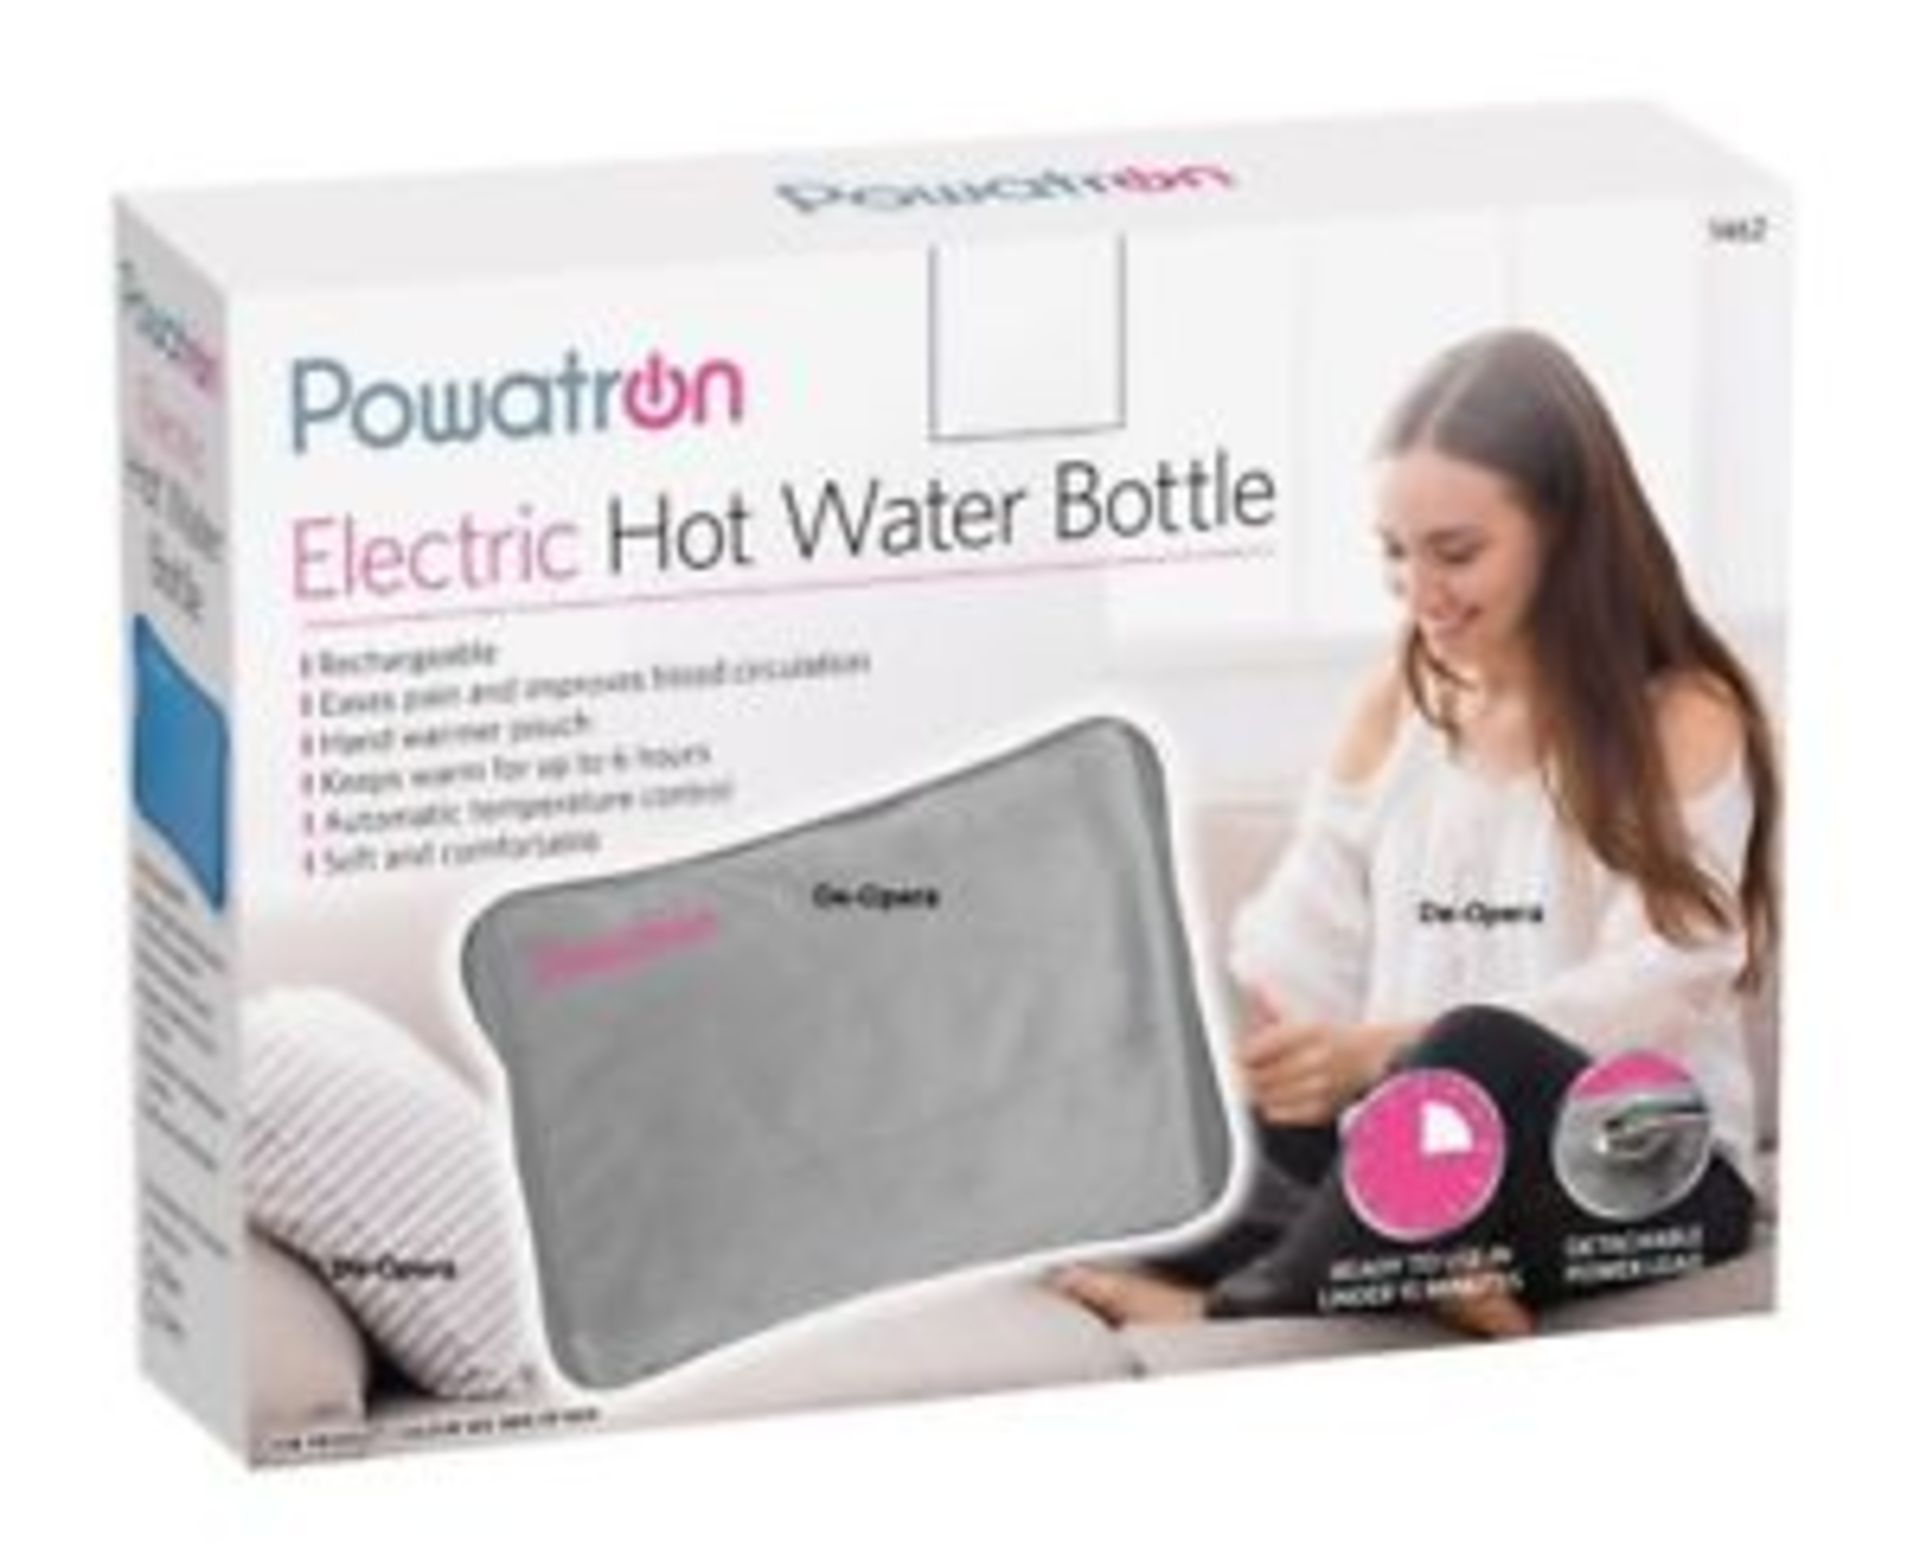 V Brand New Electric Hot Water Bottle-Rechargeable-Eases Pain & Improves Blood Circulation-Keeps